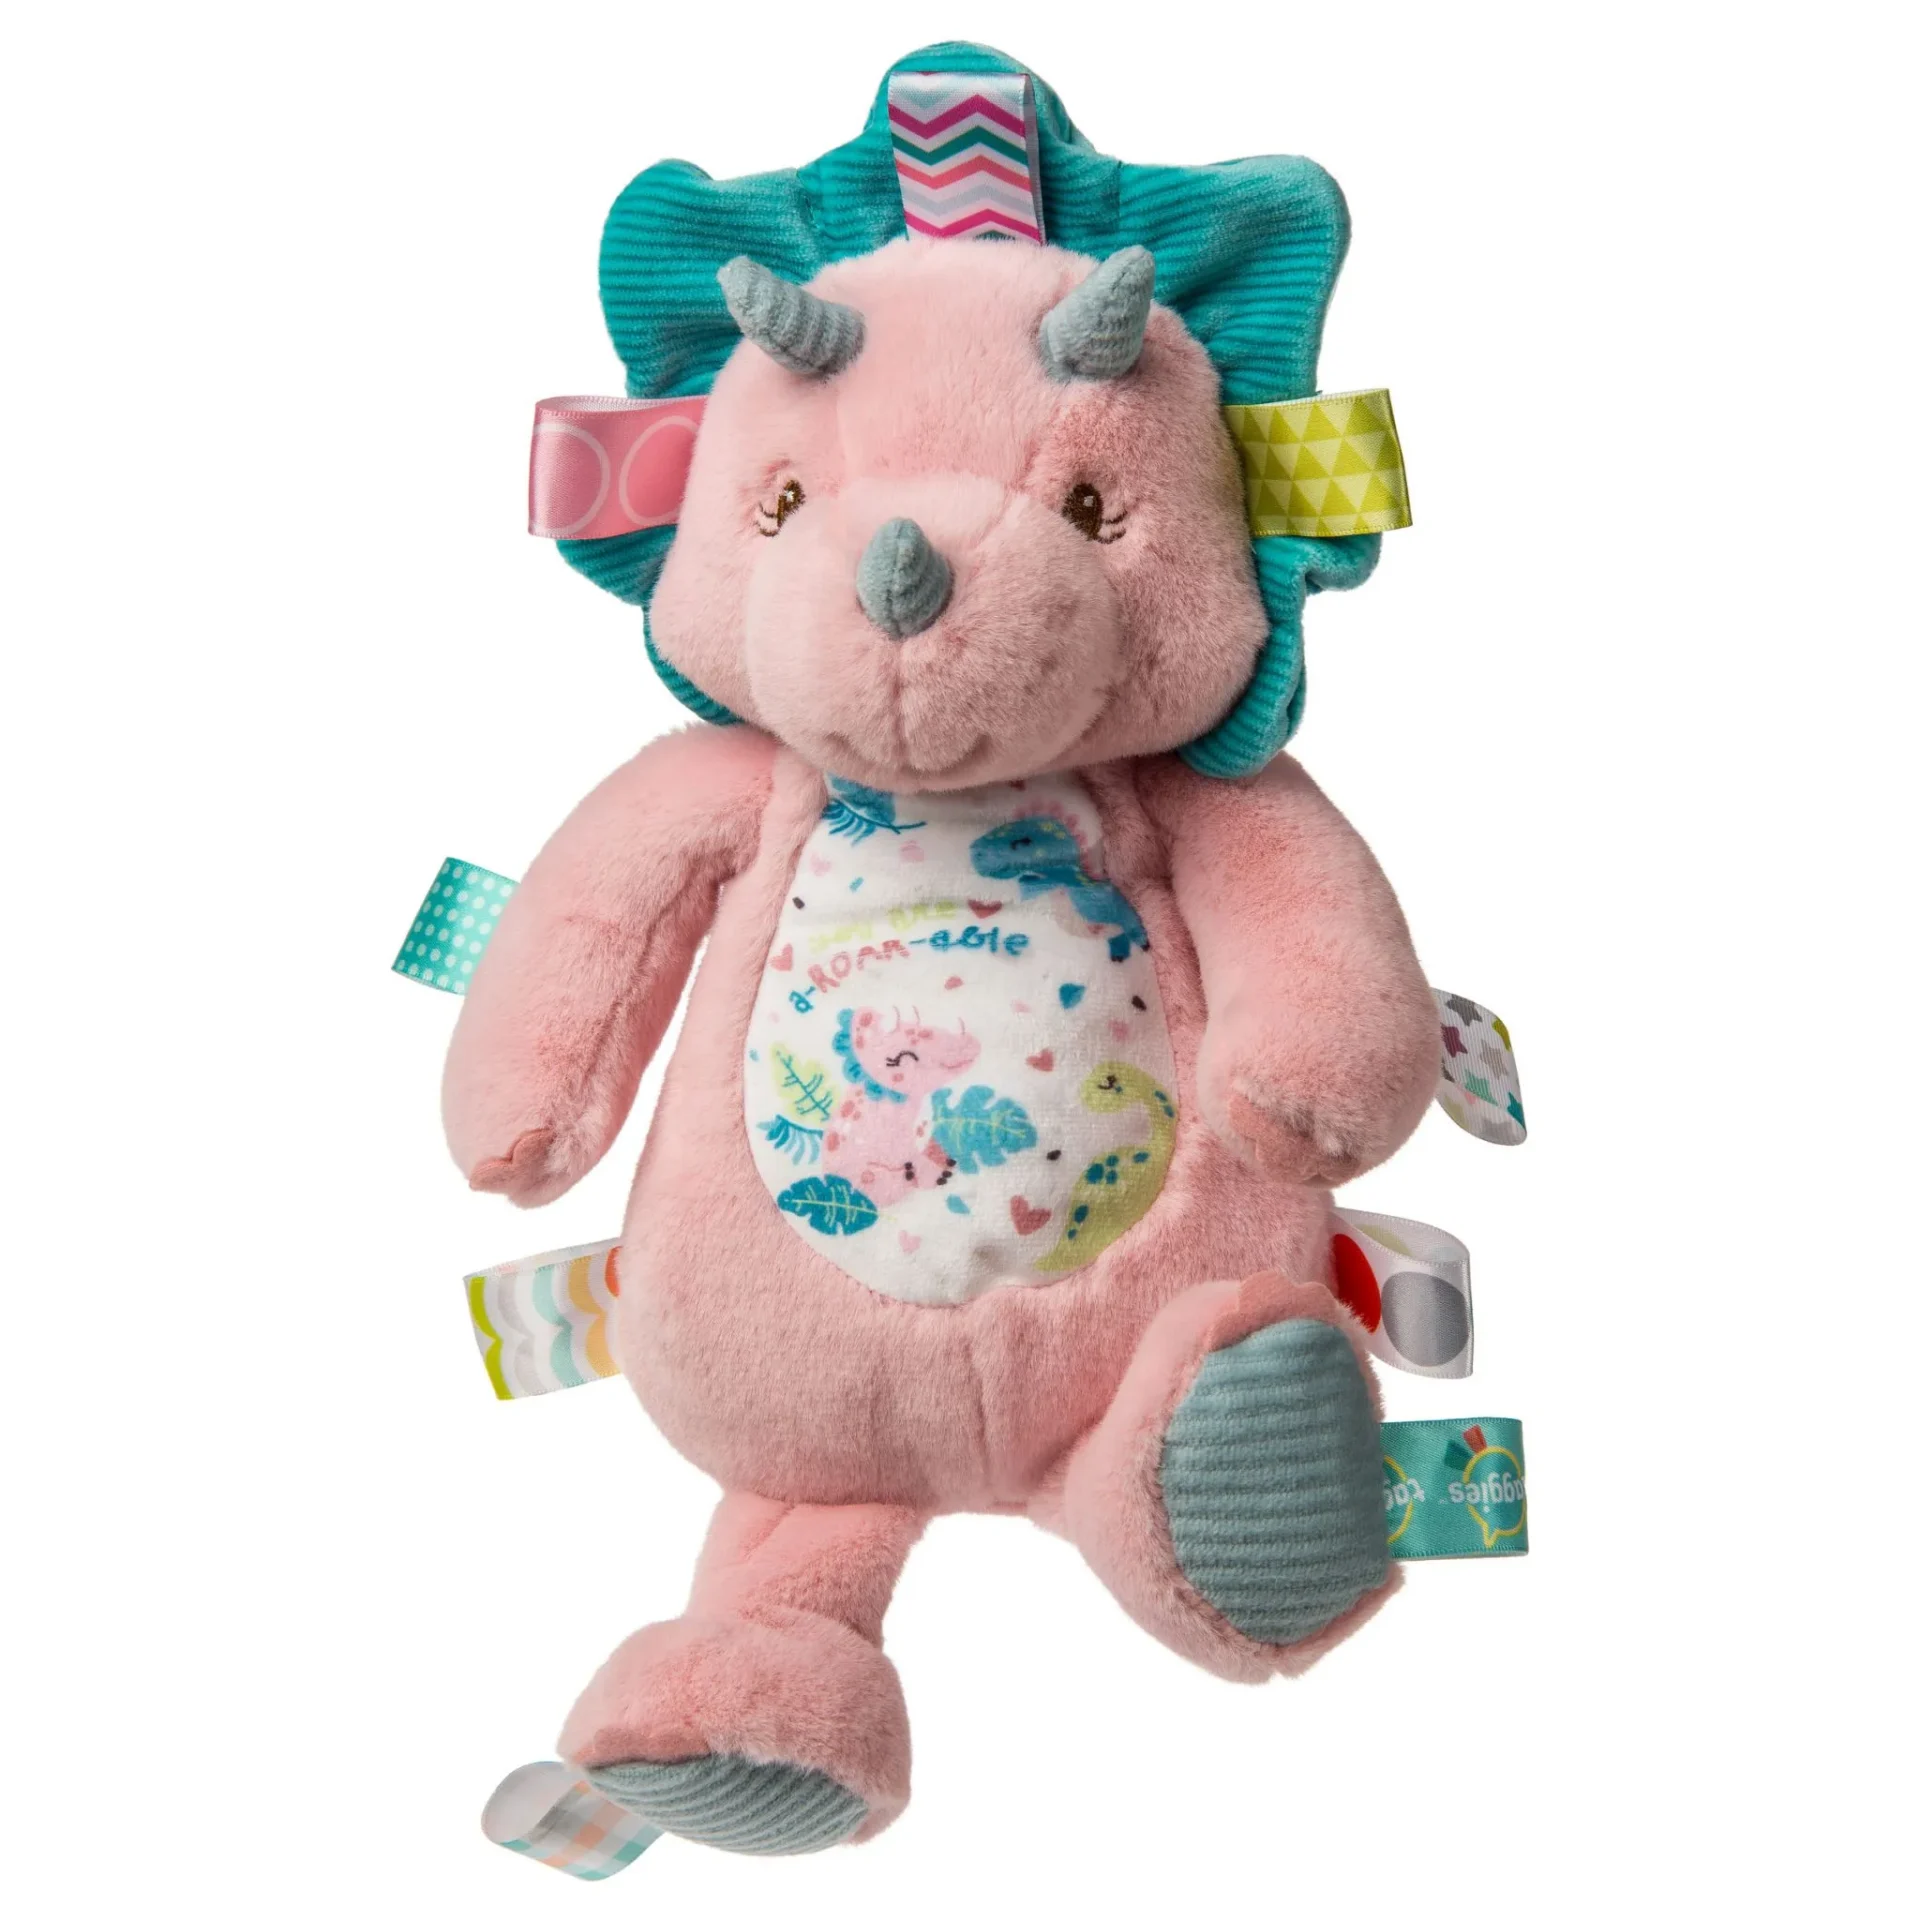 dino soft toy in pink color and blue horns